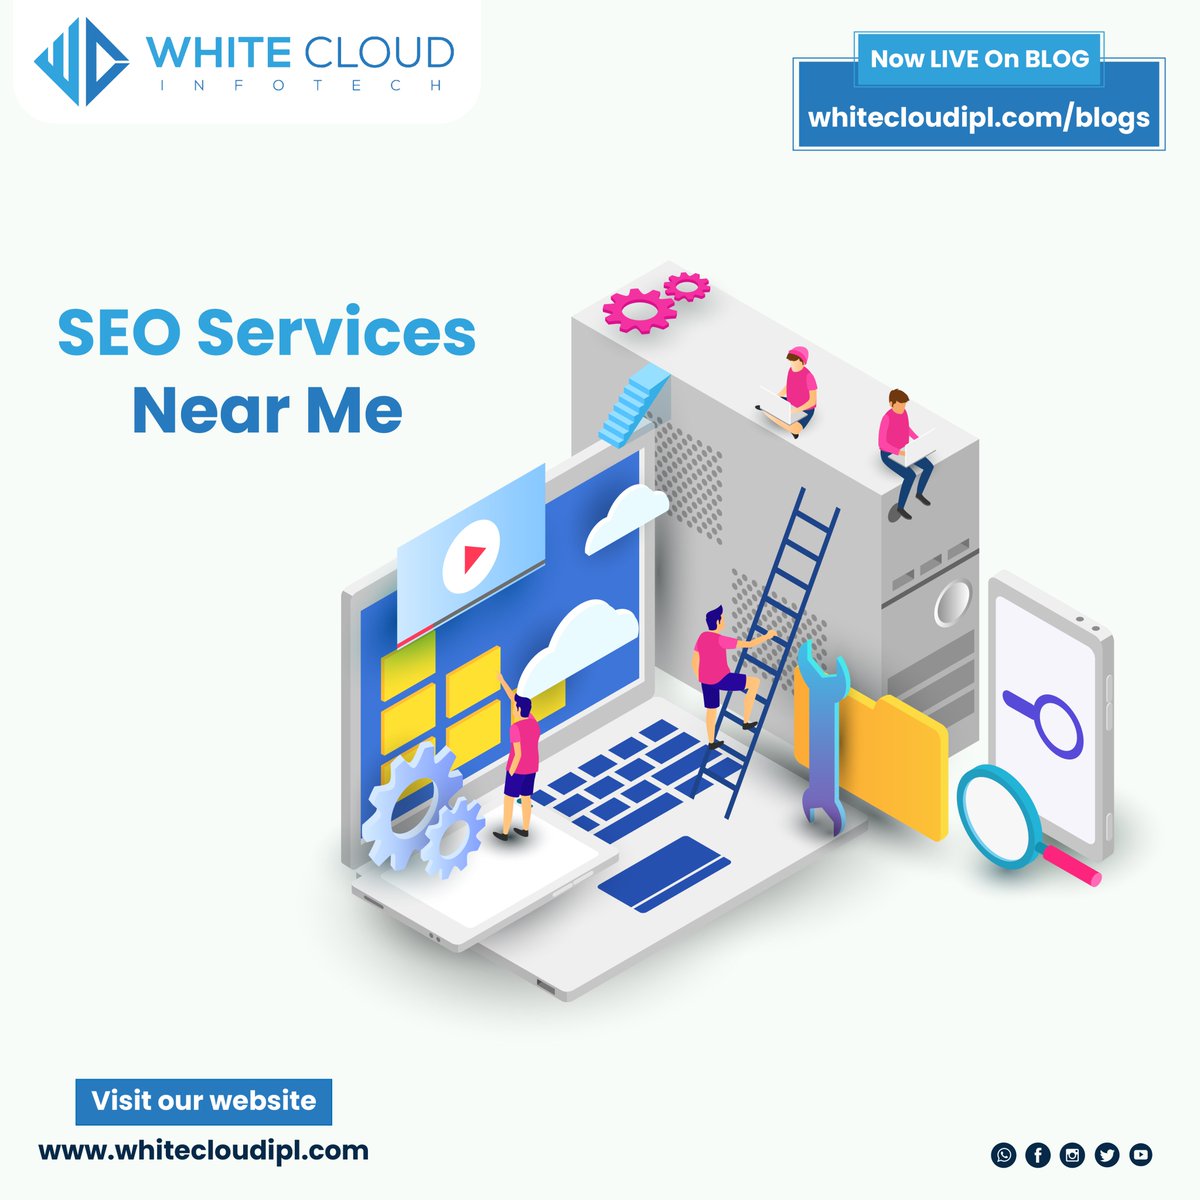 SEO Services Near Me
Read our complete blog article here: whitecloudipl.com/blogs/seo-serv…
#blog #whitecloudipl #whitecloudinfotech #itcompany #softwaredevelopmentcompany #SEO #Services #Near #Me #SEOServicesNearMe